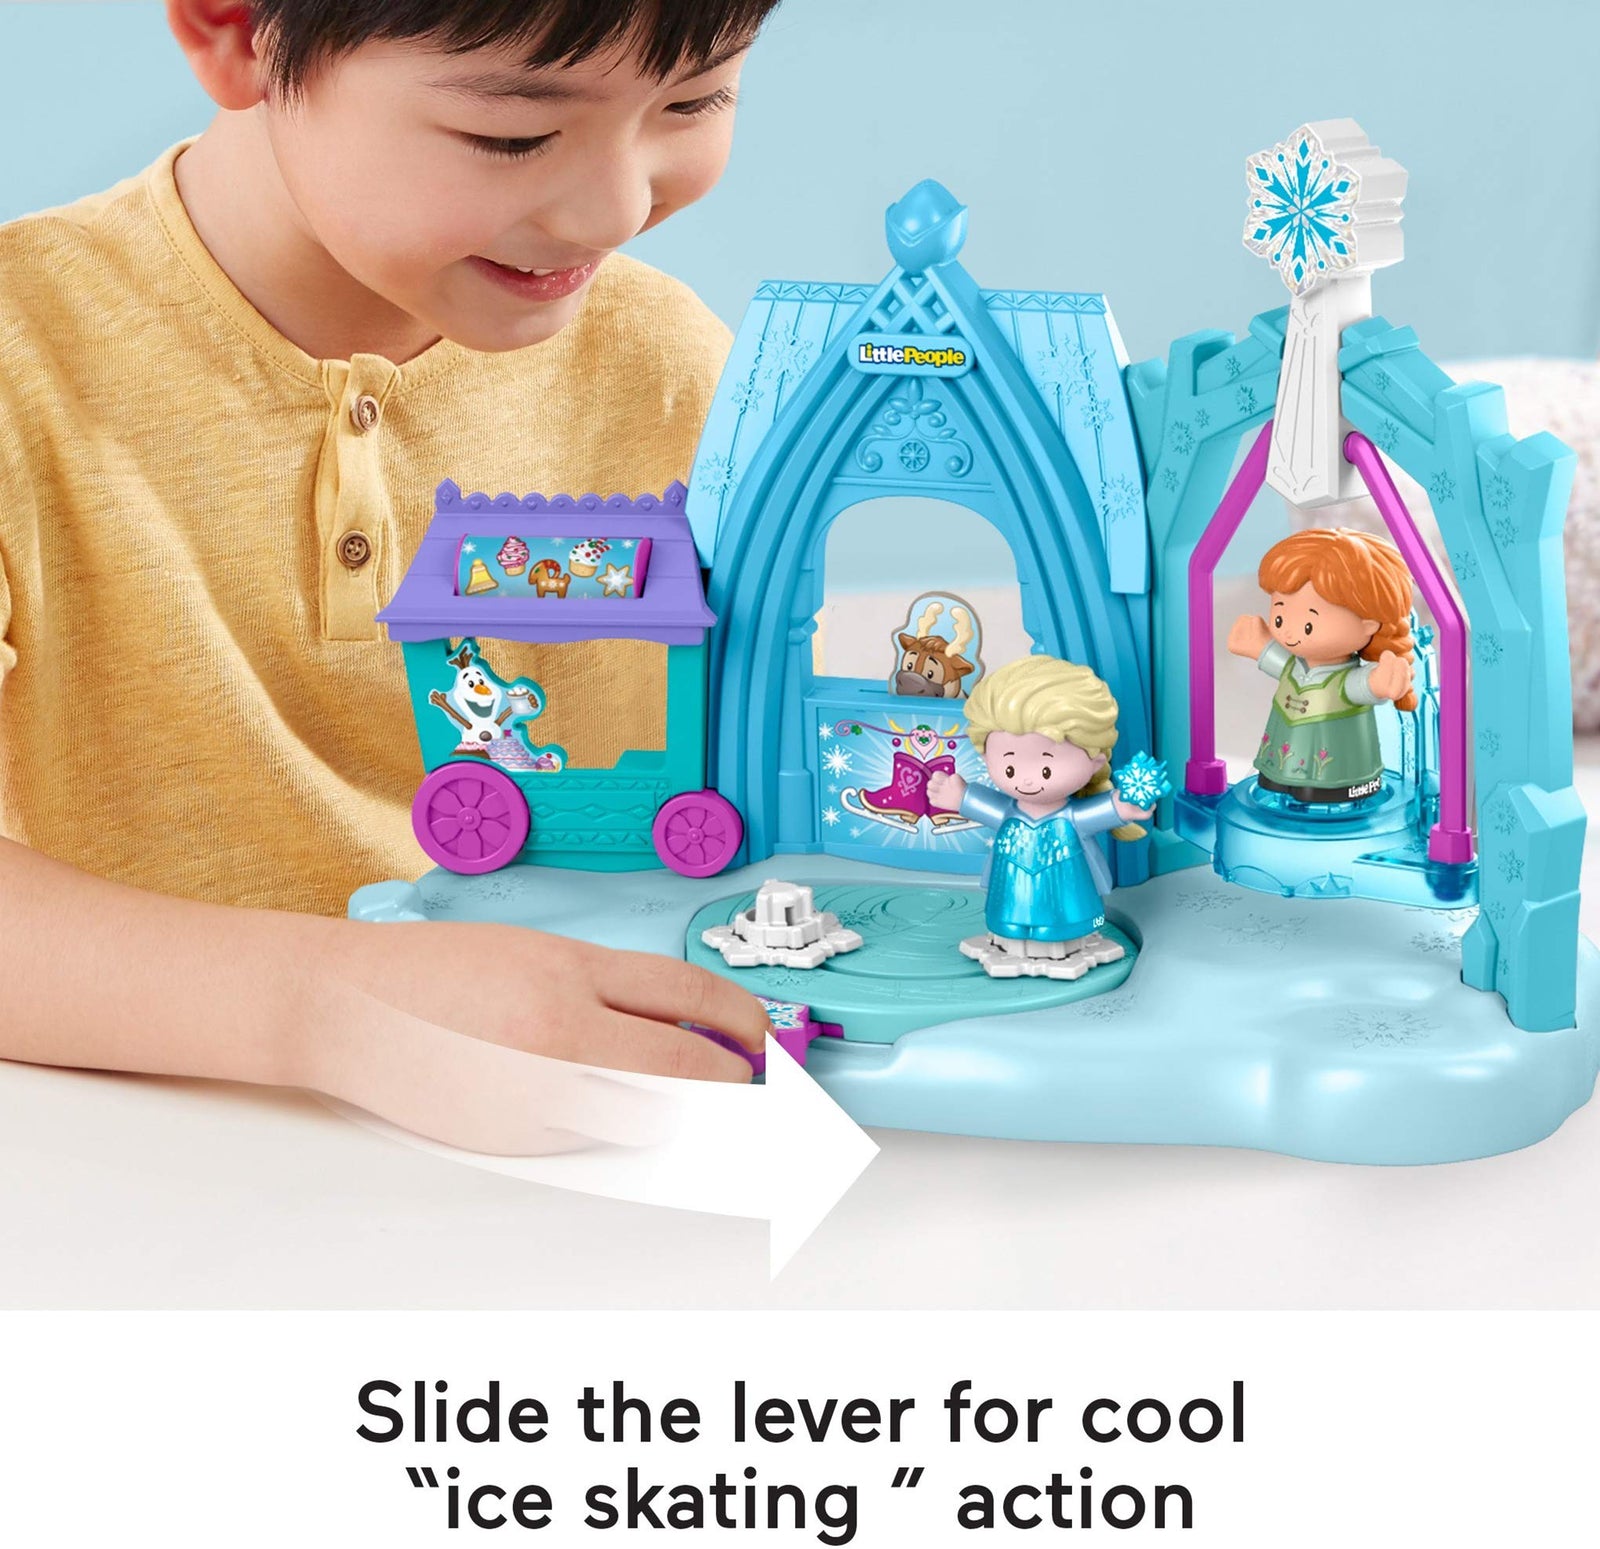 Disney Frozen Arendelle Winter Wonderland by Little People, ice skating playset with Anna and Elsa figures for toddlers and preschool kids